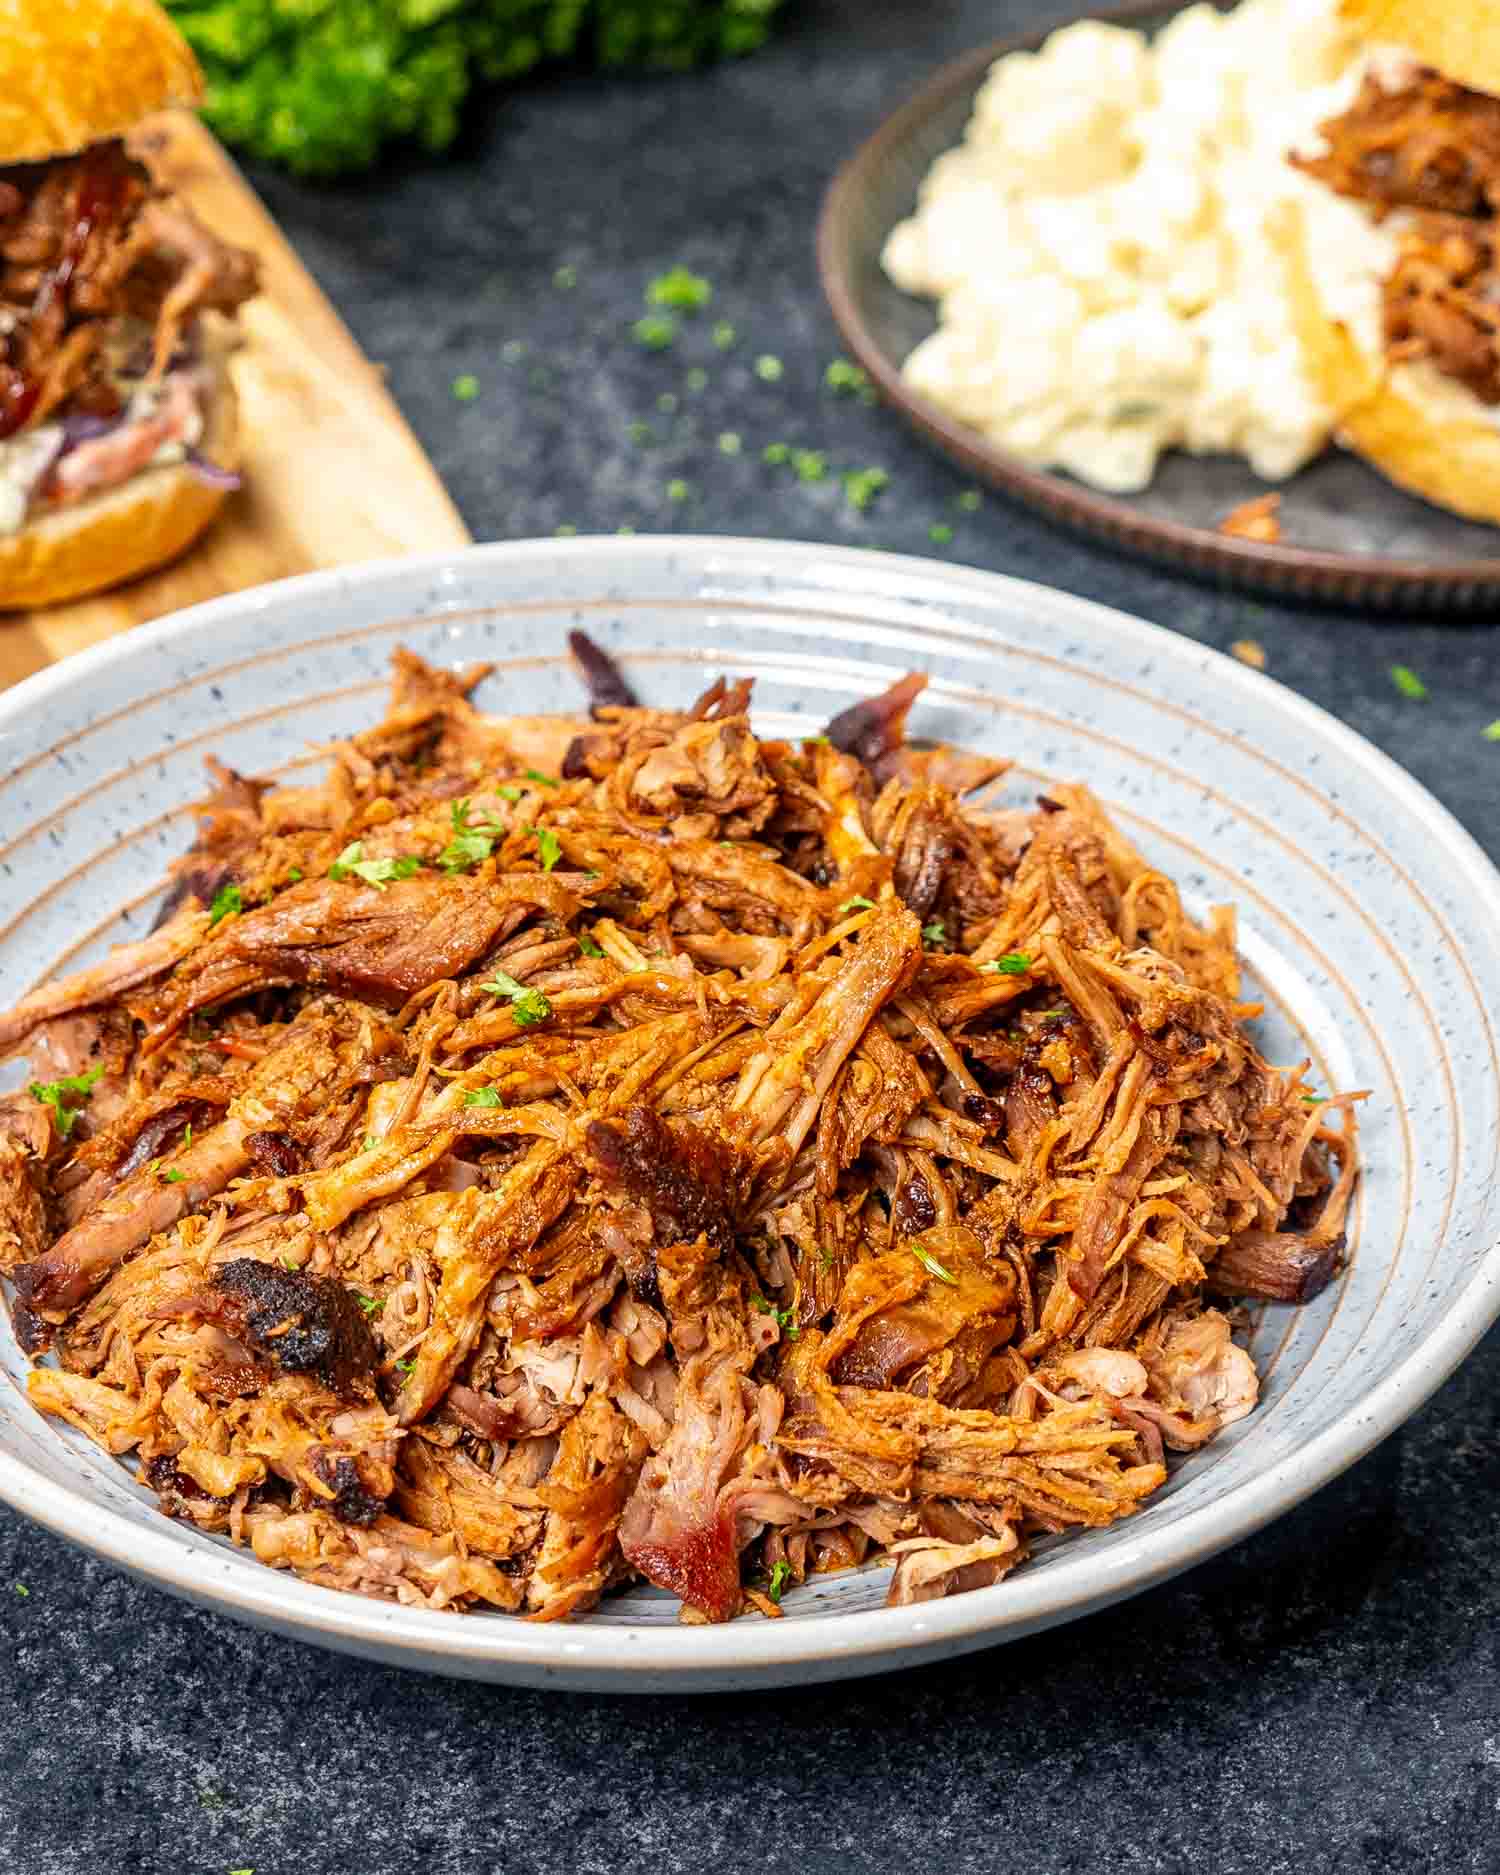 freshly made pulled pork in a bowl.